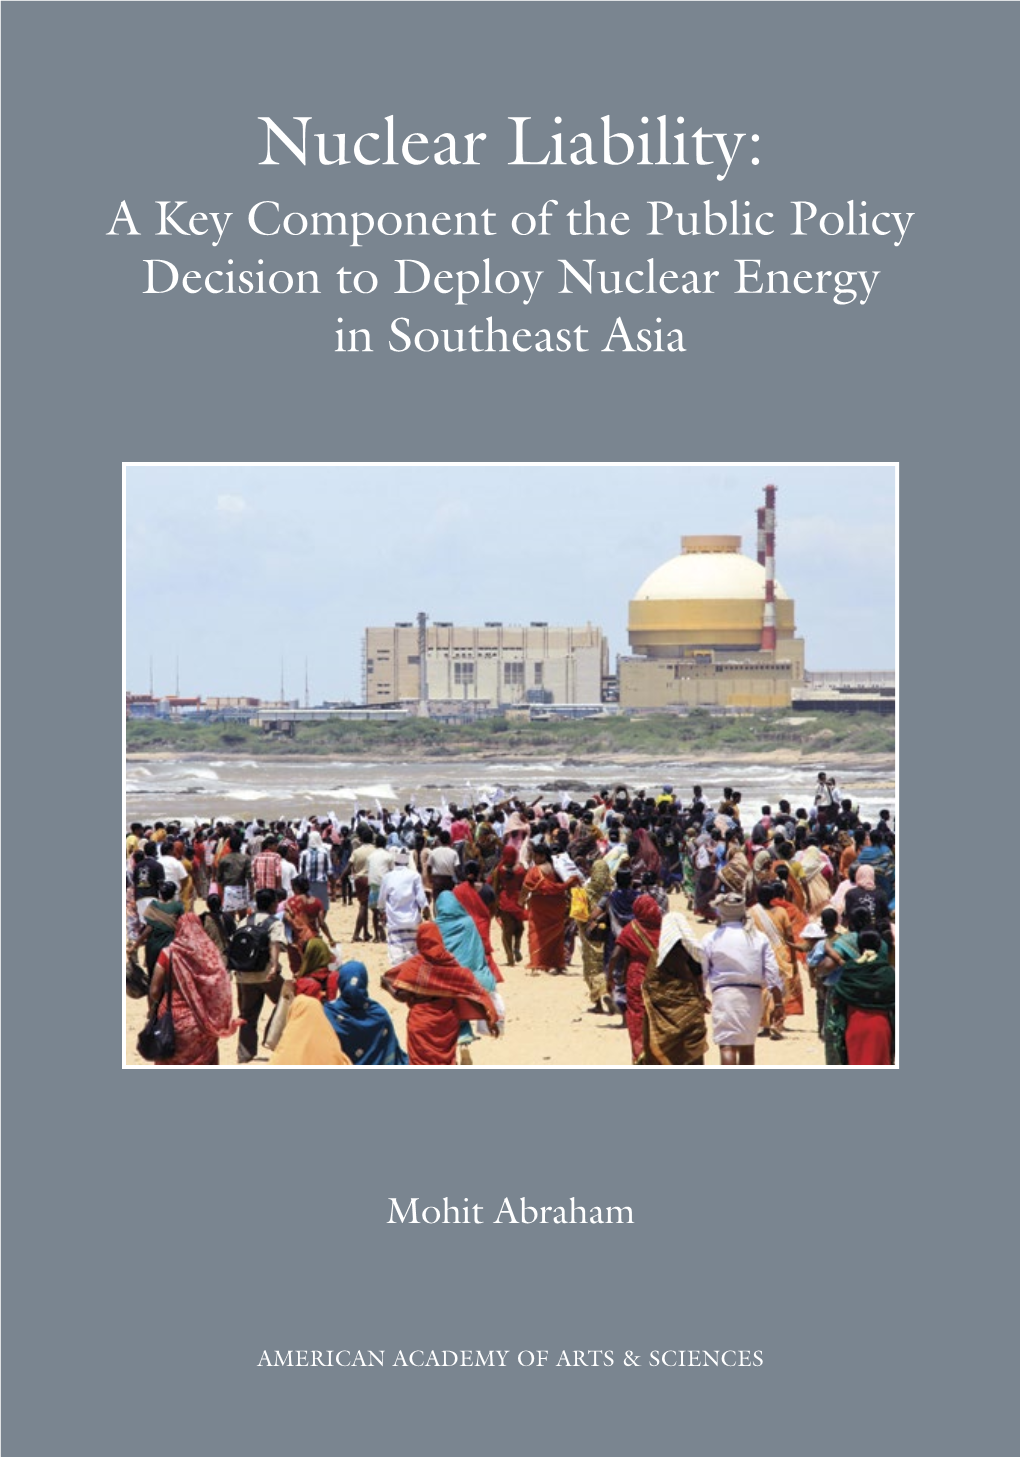 Nuclear Liability: a Key Component of the Public Policy Decision to Deploy Nuclear Energy in Southeast Asia